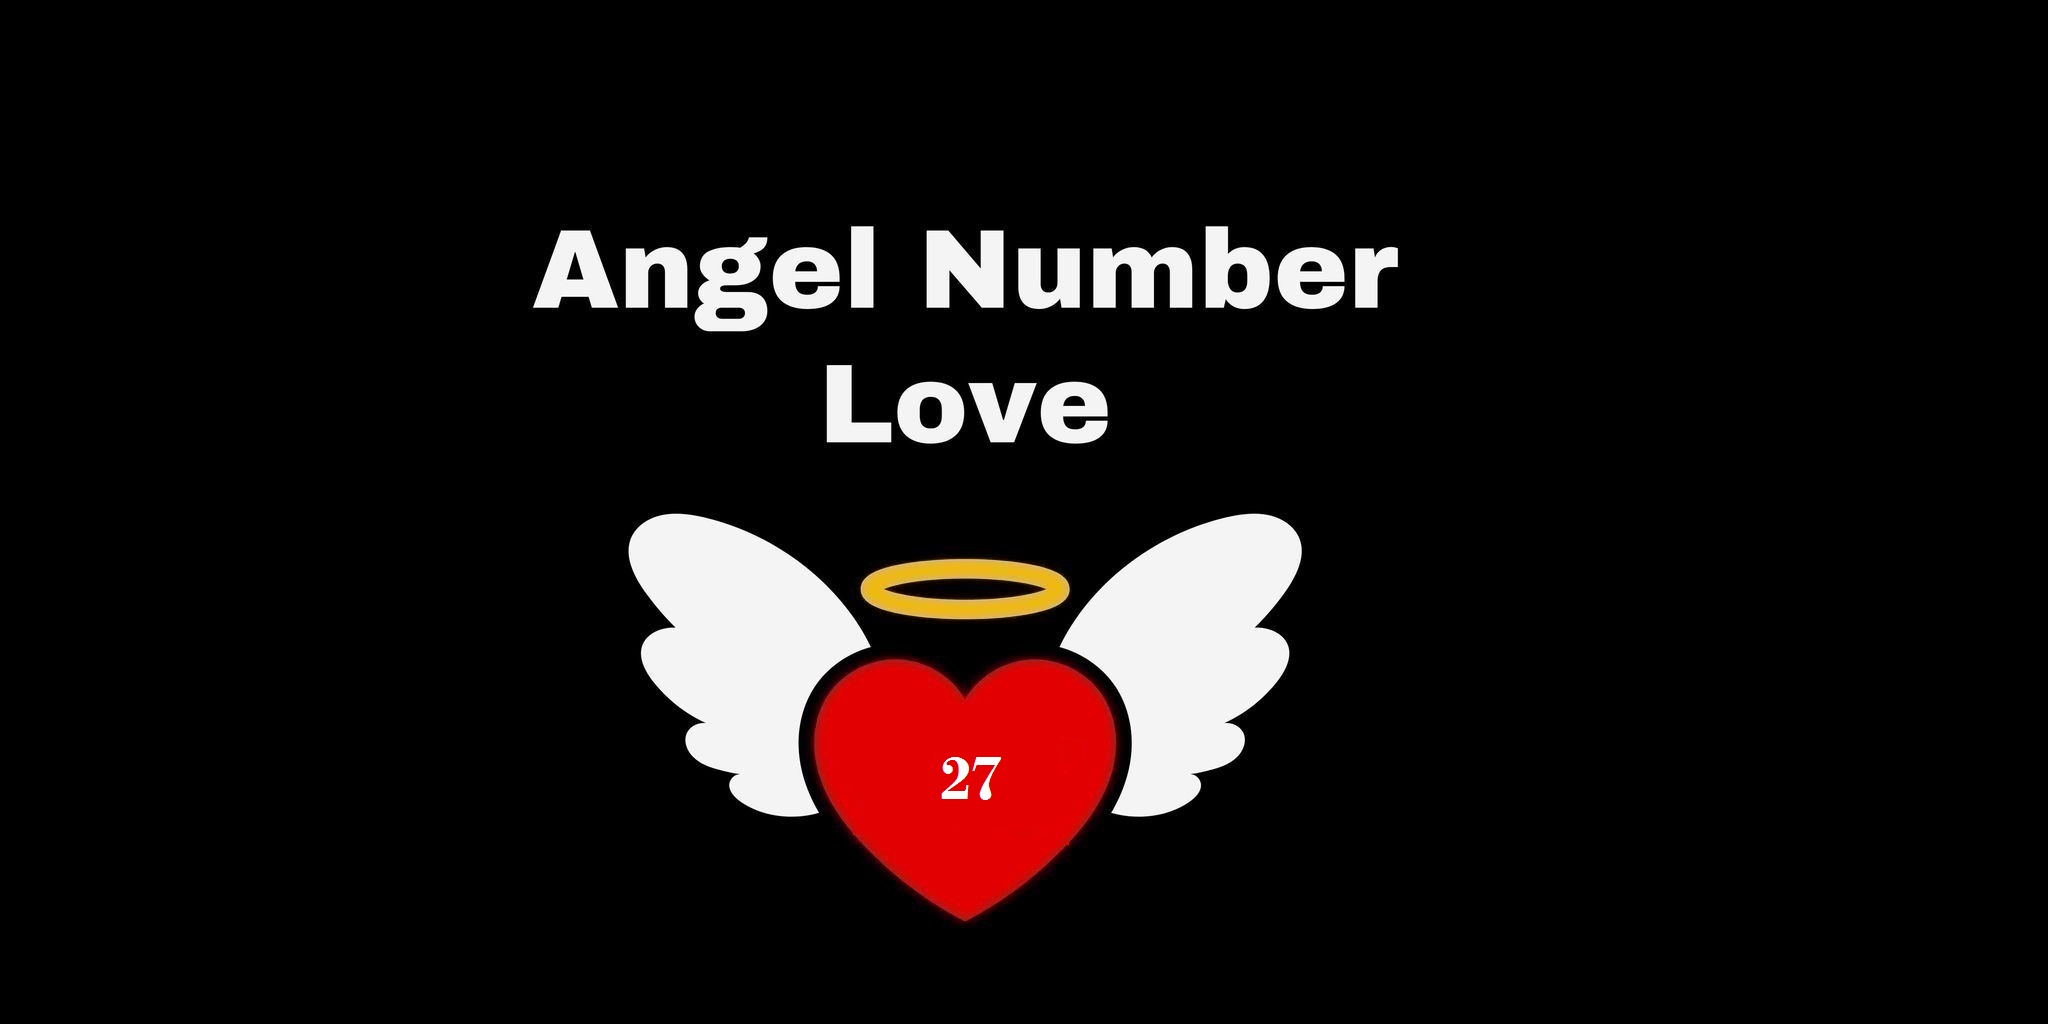 27 Angel Number Meaning In Love